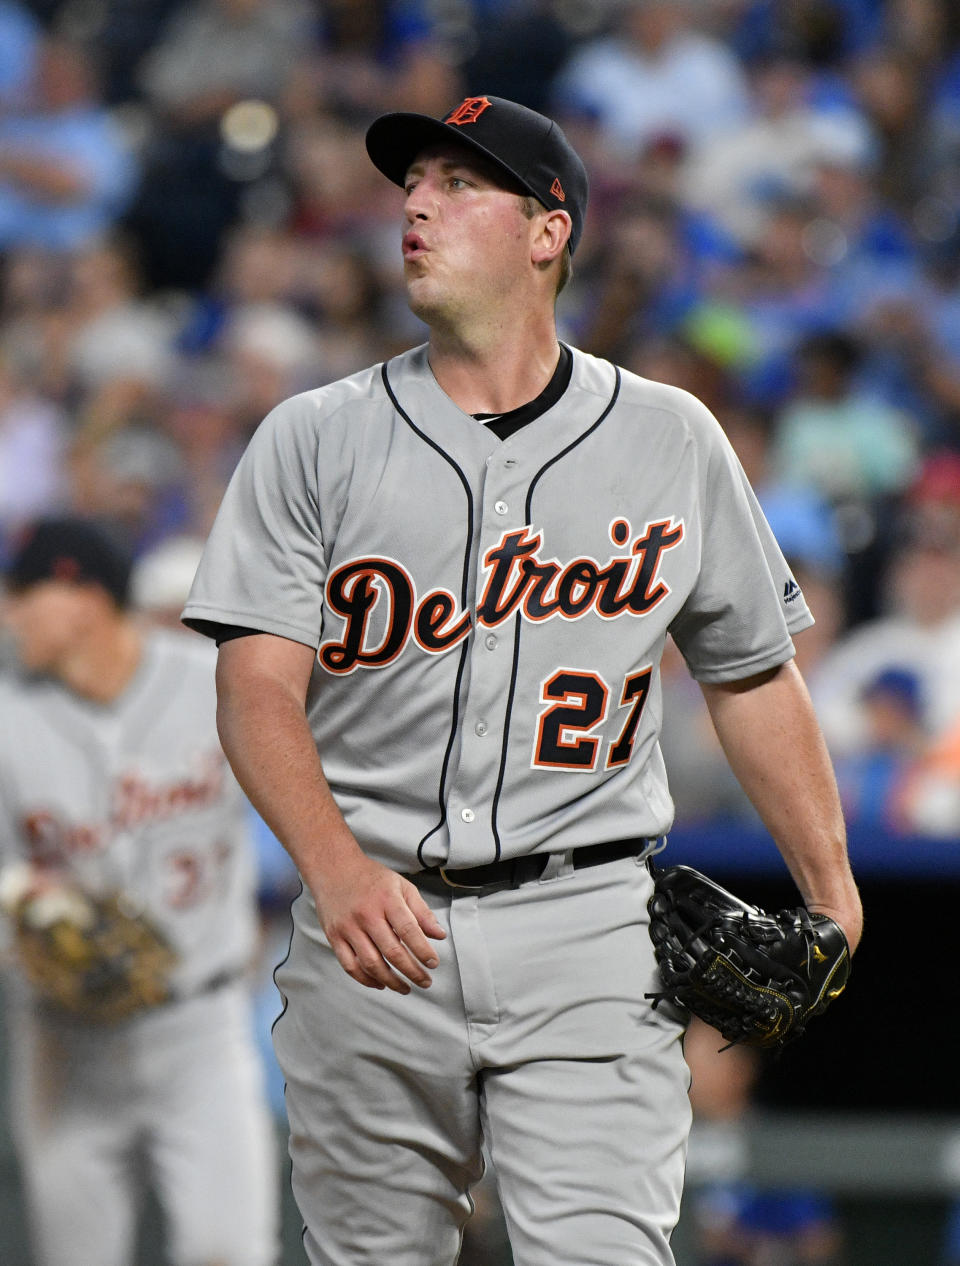 Detroit Tigers starting pitcher Jordan Zimmermann walks to the dugout after pitching in the fifth inning against the Kansas City Royals during a baseball game Tuesday, July 24, 2018, in Kansas City, Mo. (AP Photo/Ed Zurga)